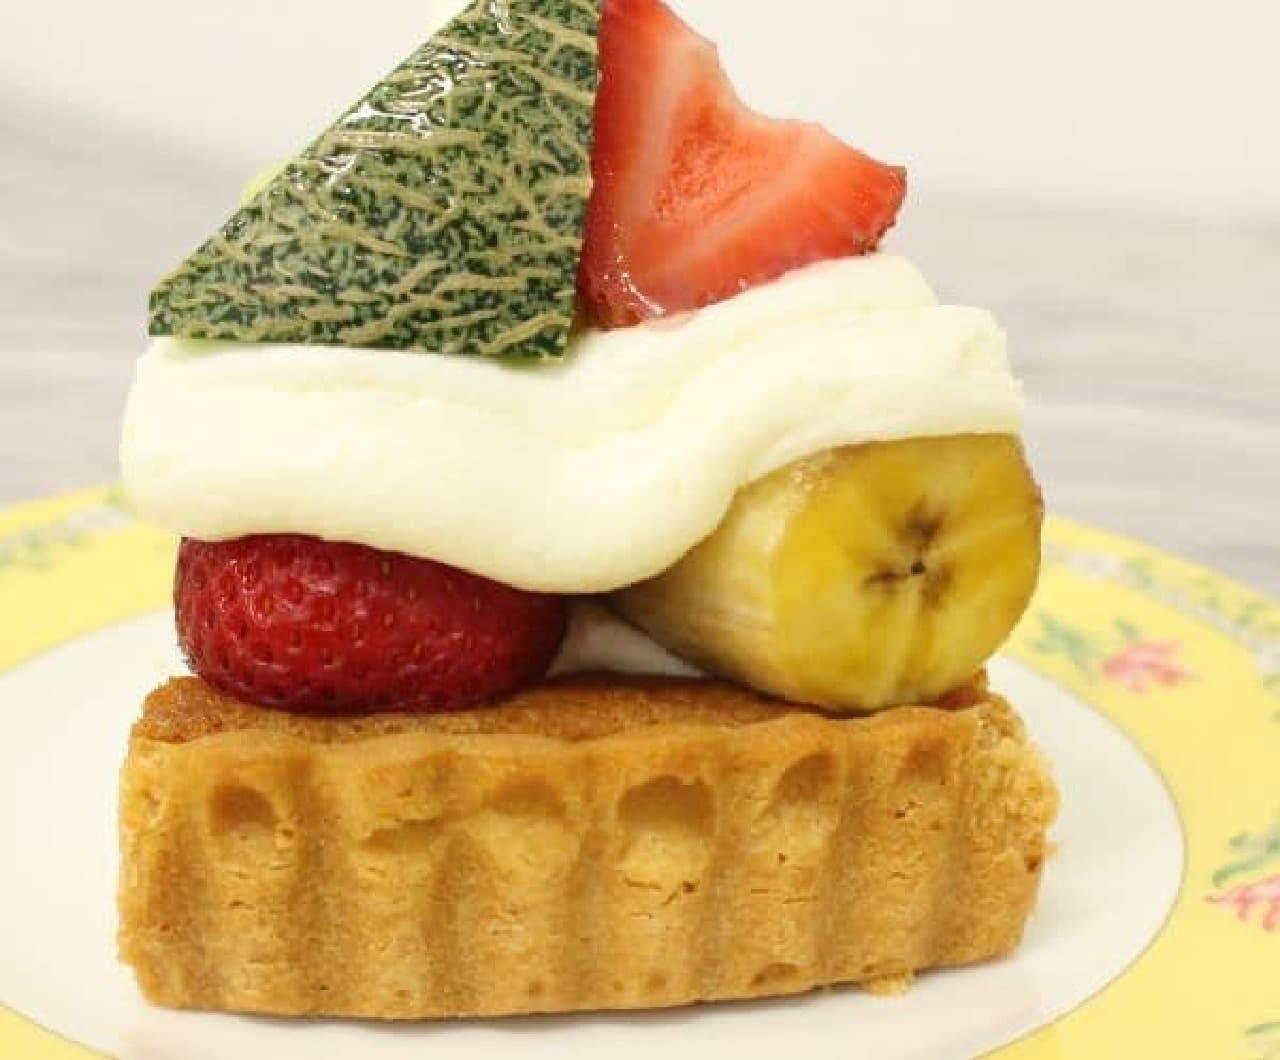 "Various tart" is a tart topped with various fruits.